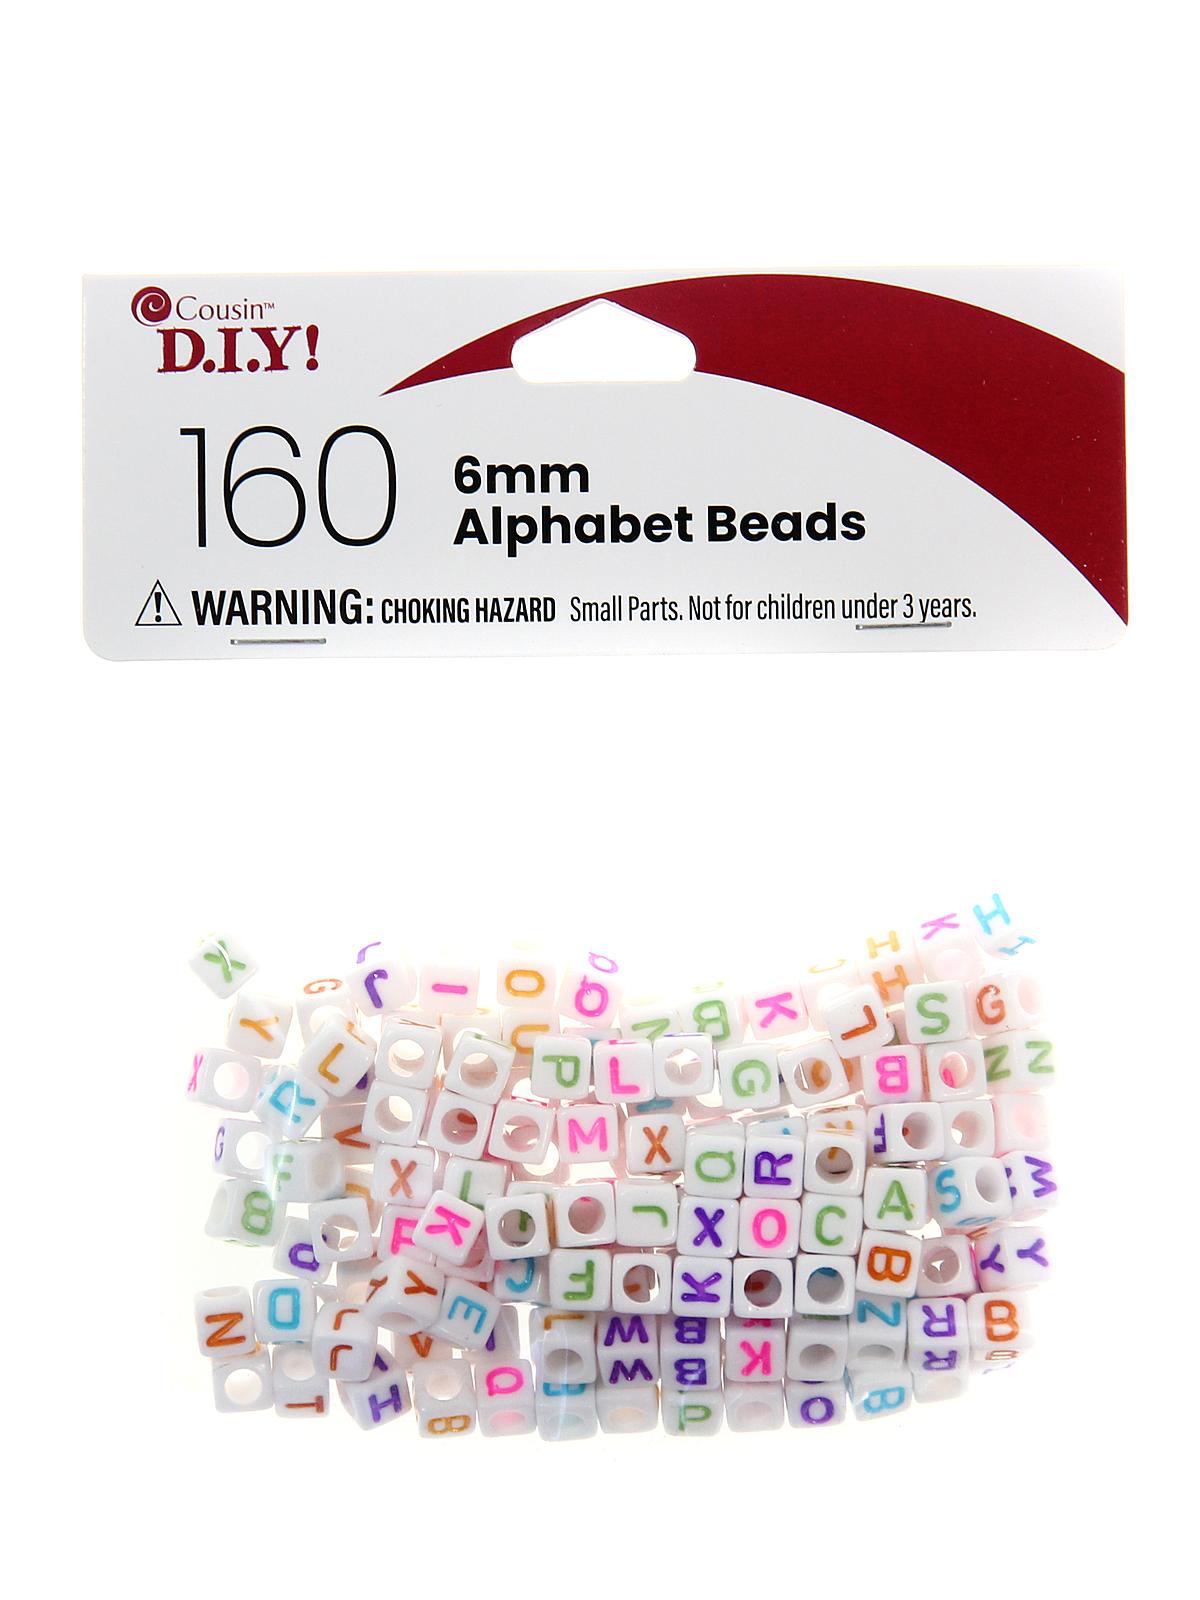 Alphabet Beads Multicolor On White Square, 6mm Pack Of 160